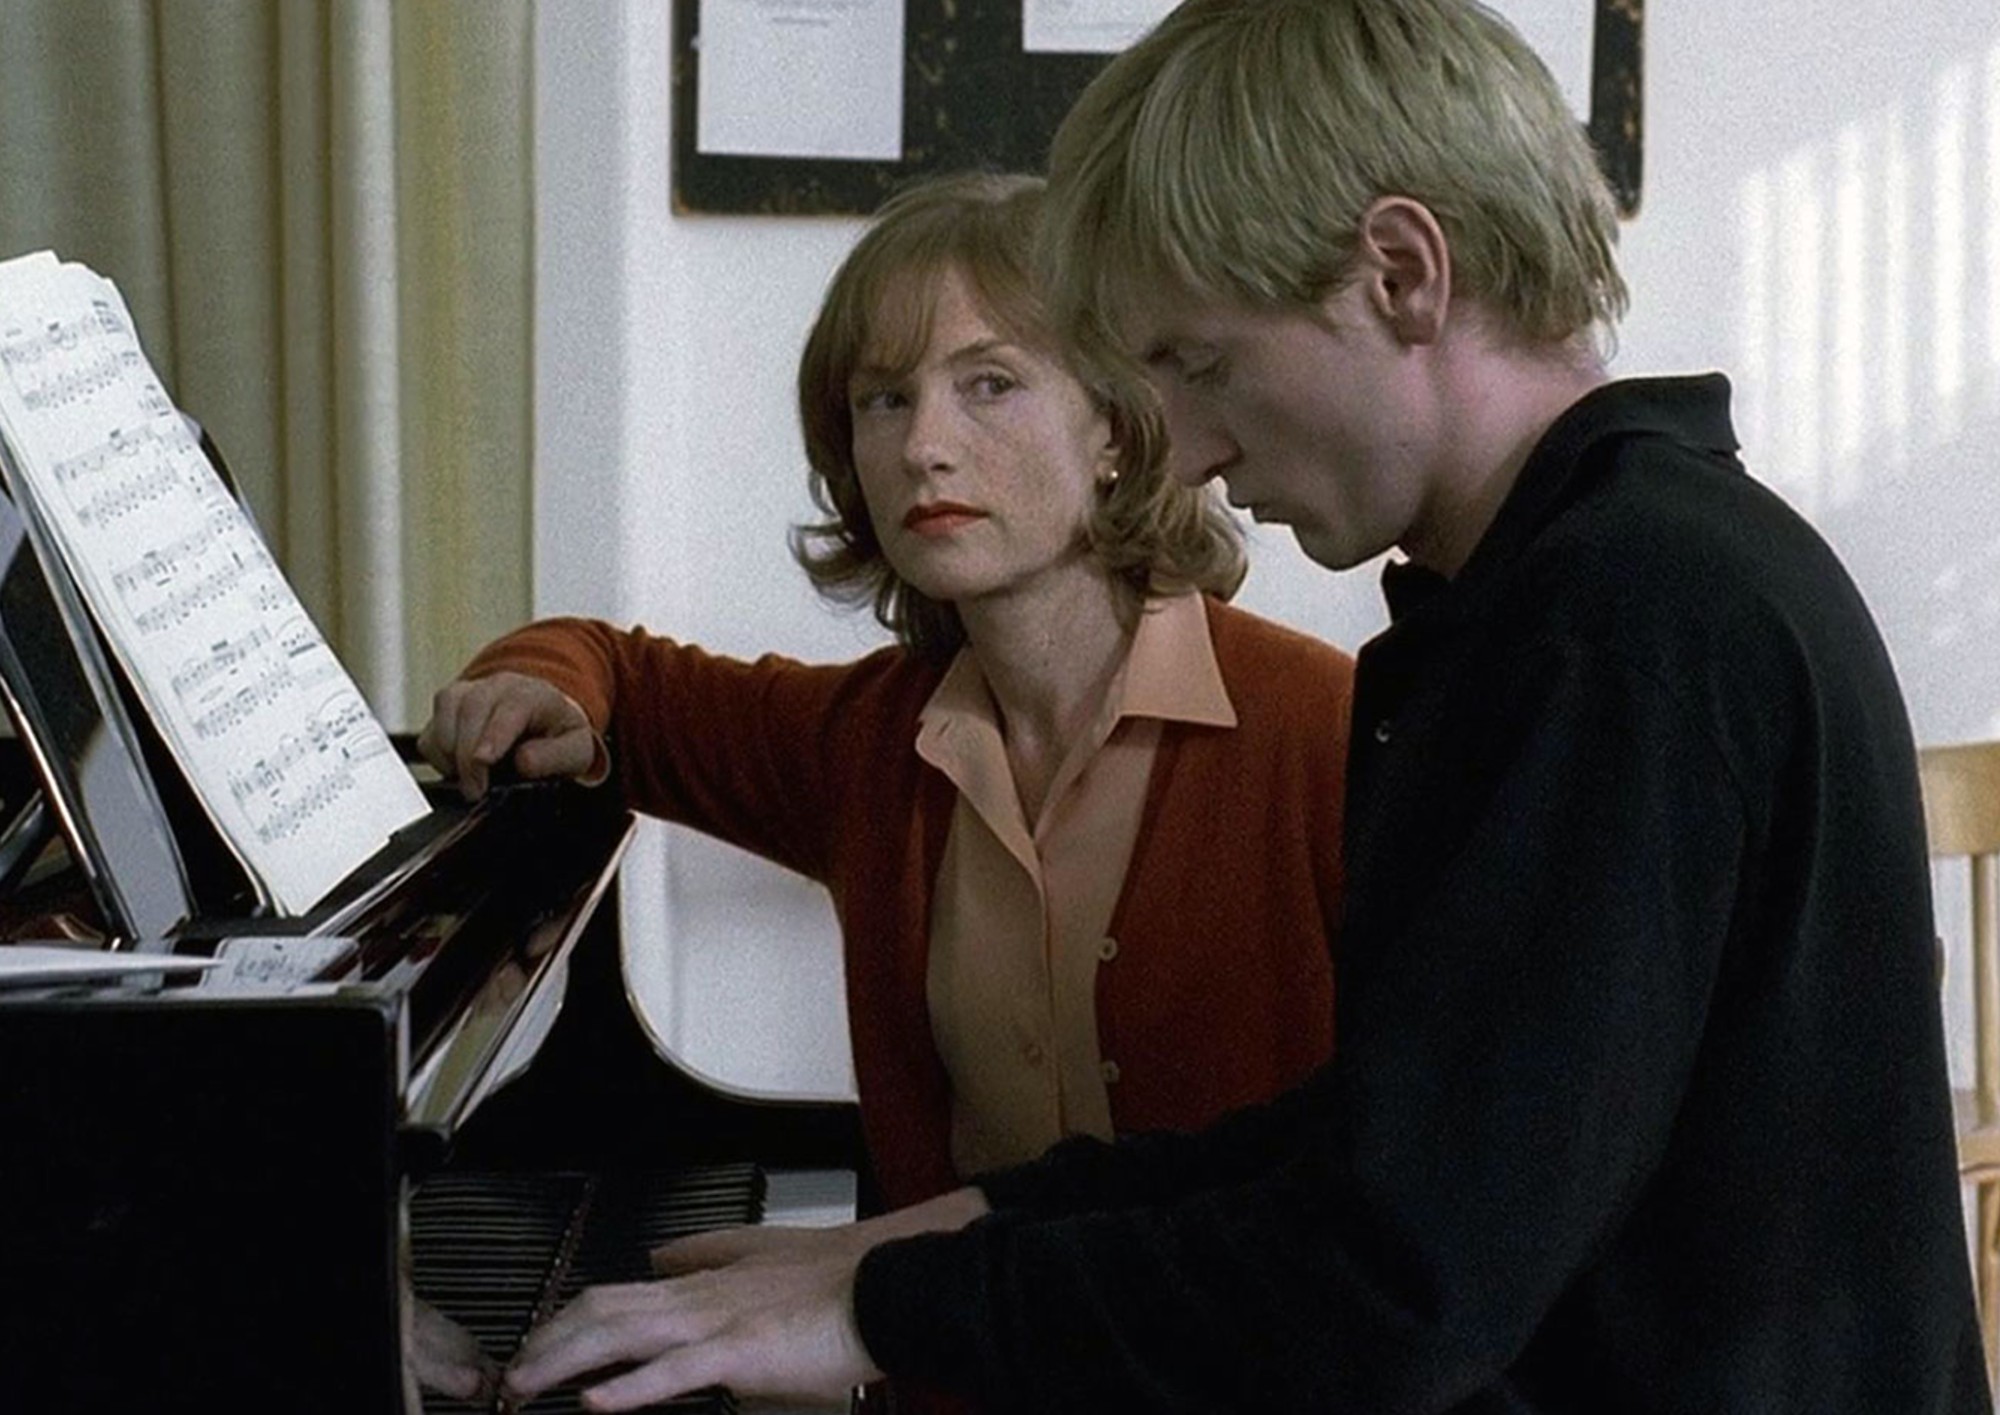 Image from the motion picture The Piano Teacher